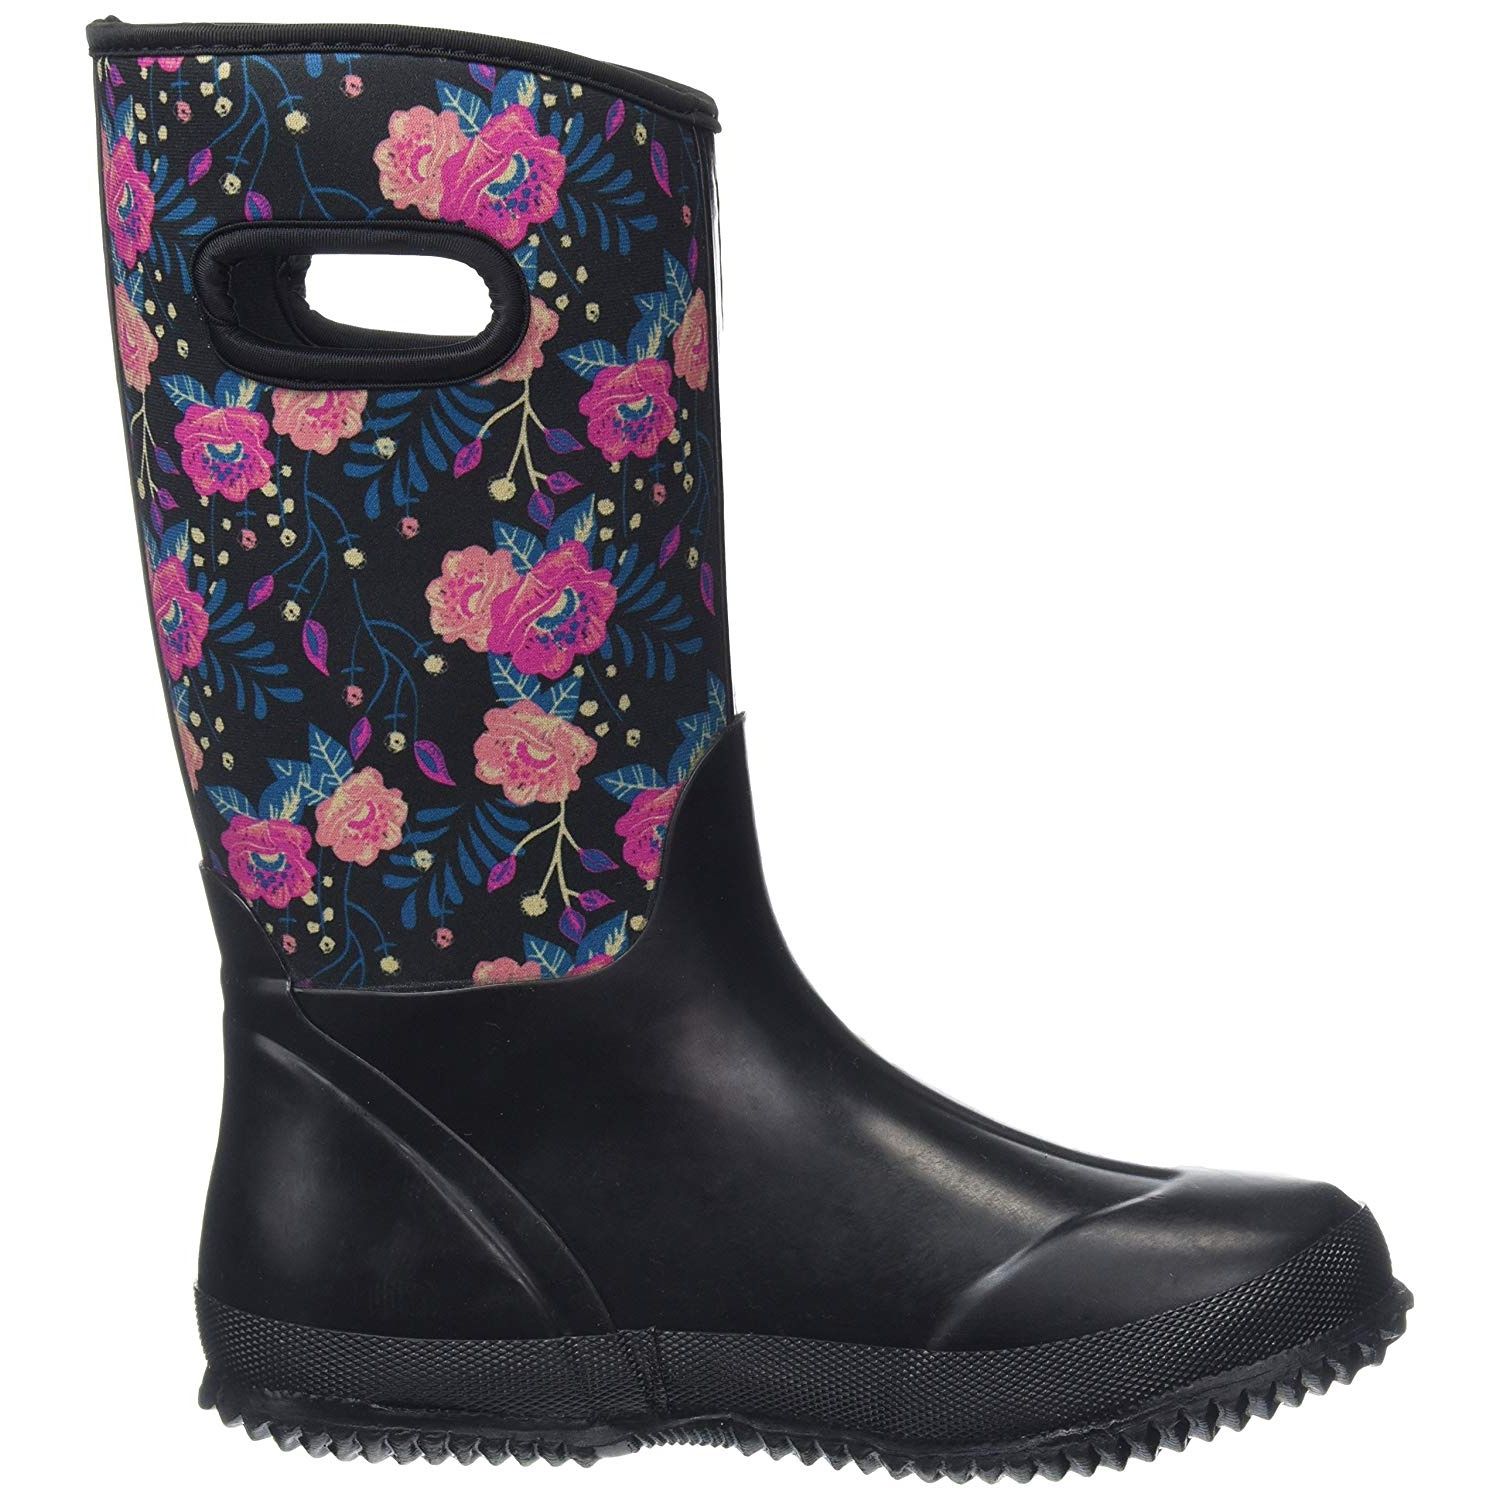 Full length wellies in neoprene rubber. Floral print. Pull handle. Traction outsole. Waterproof. Upper: Neoprene, Lining: Textile, Insole: EVA, Outsole: Rubber.